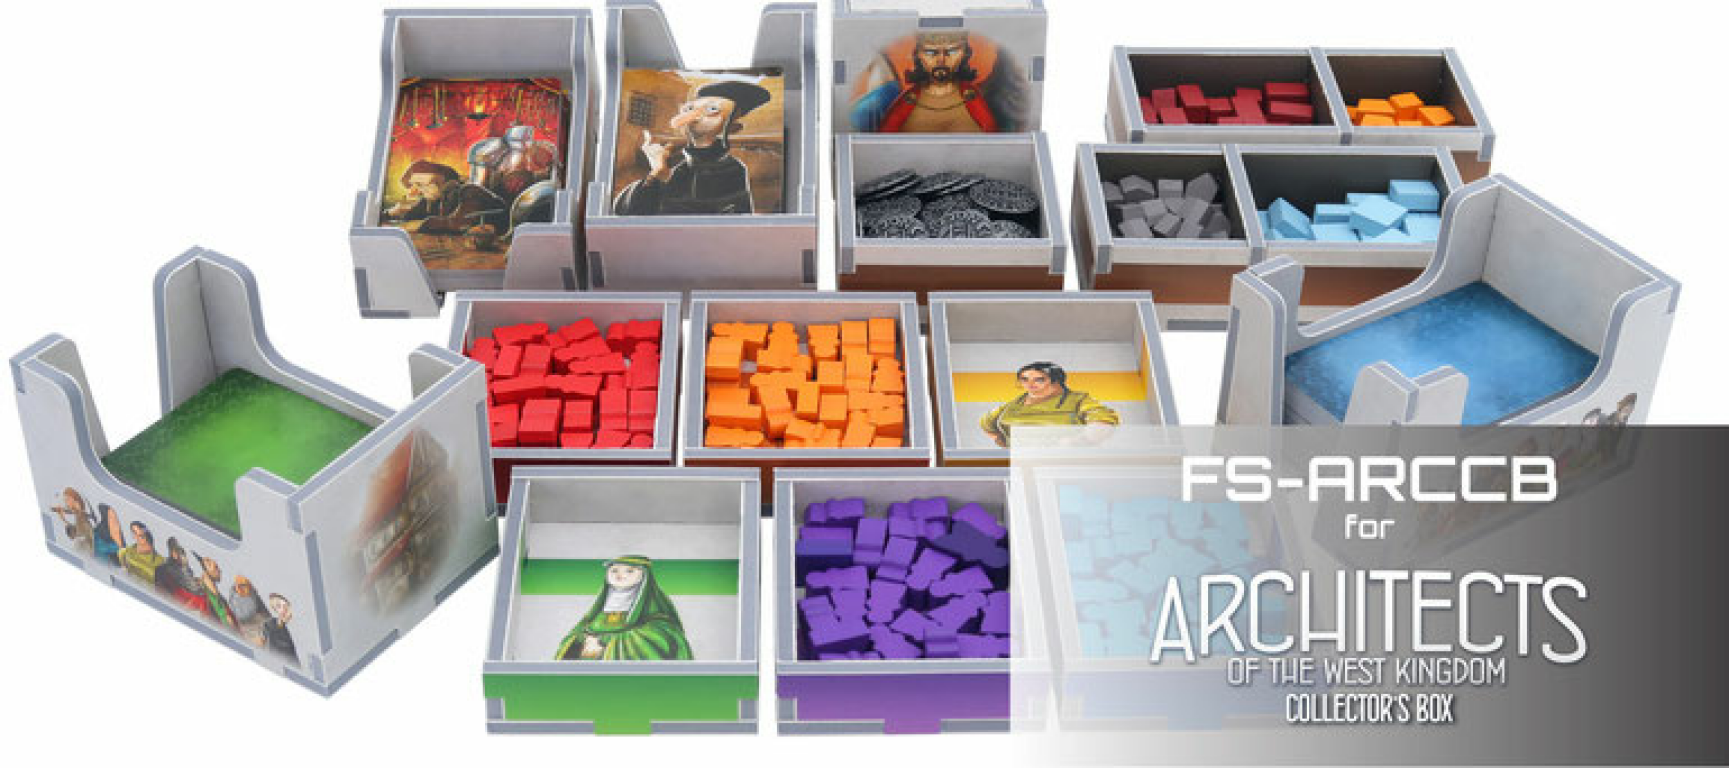 Architects of the West Kingdom Collector's Box: Folded Space Insert composants